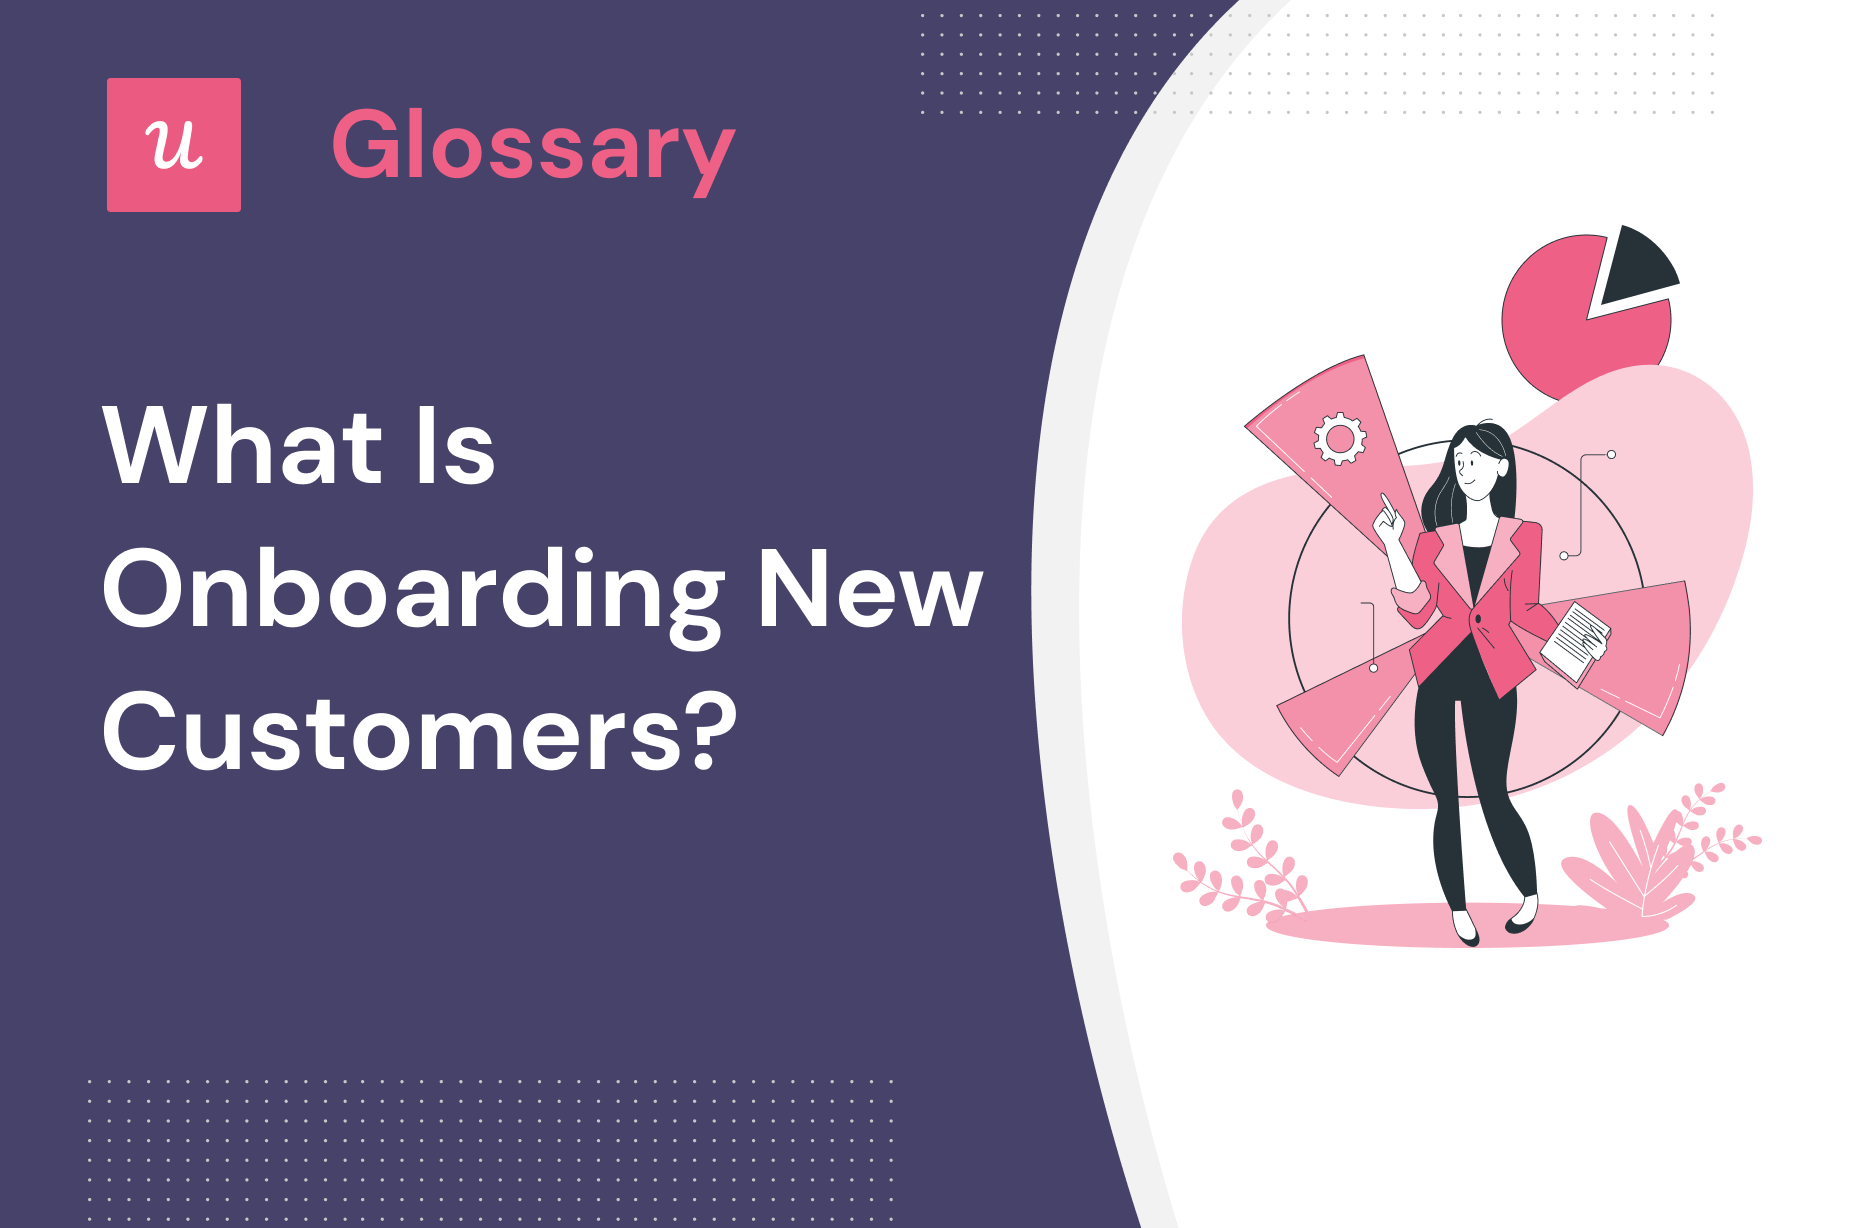 What is Onboarding New Customers?